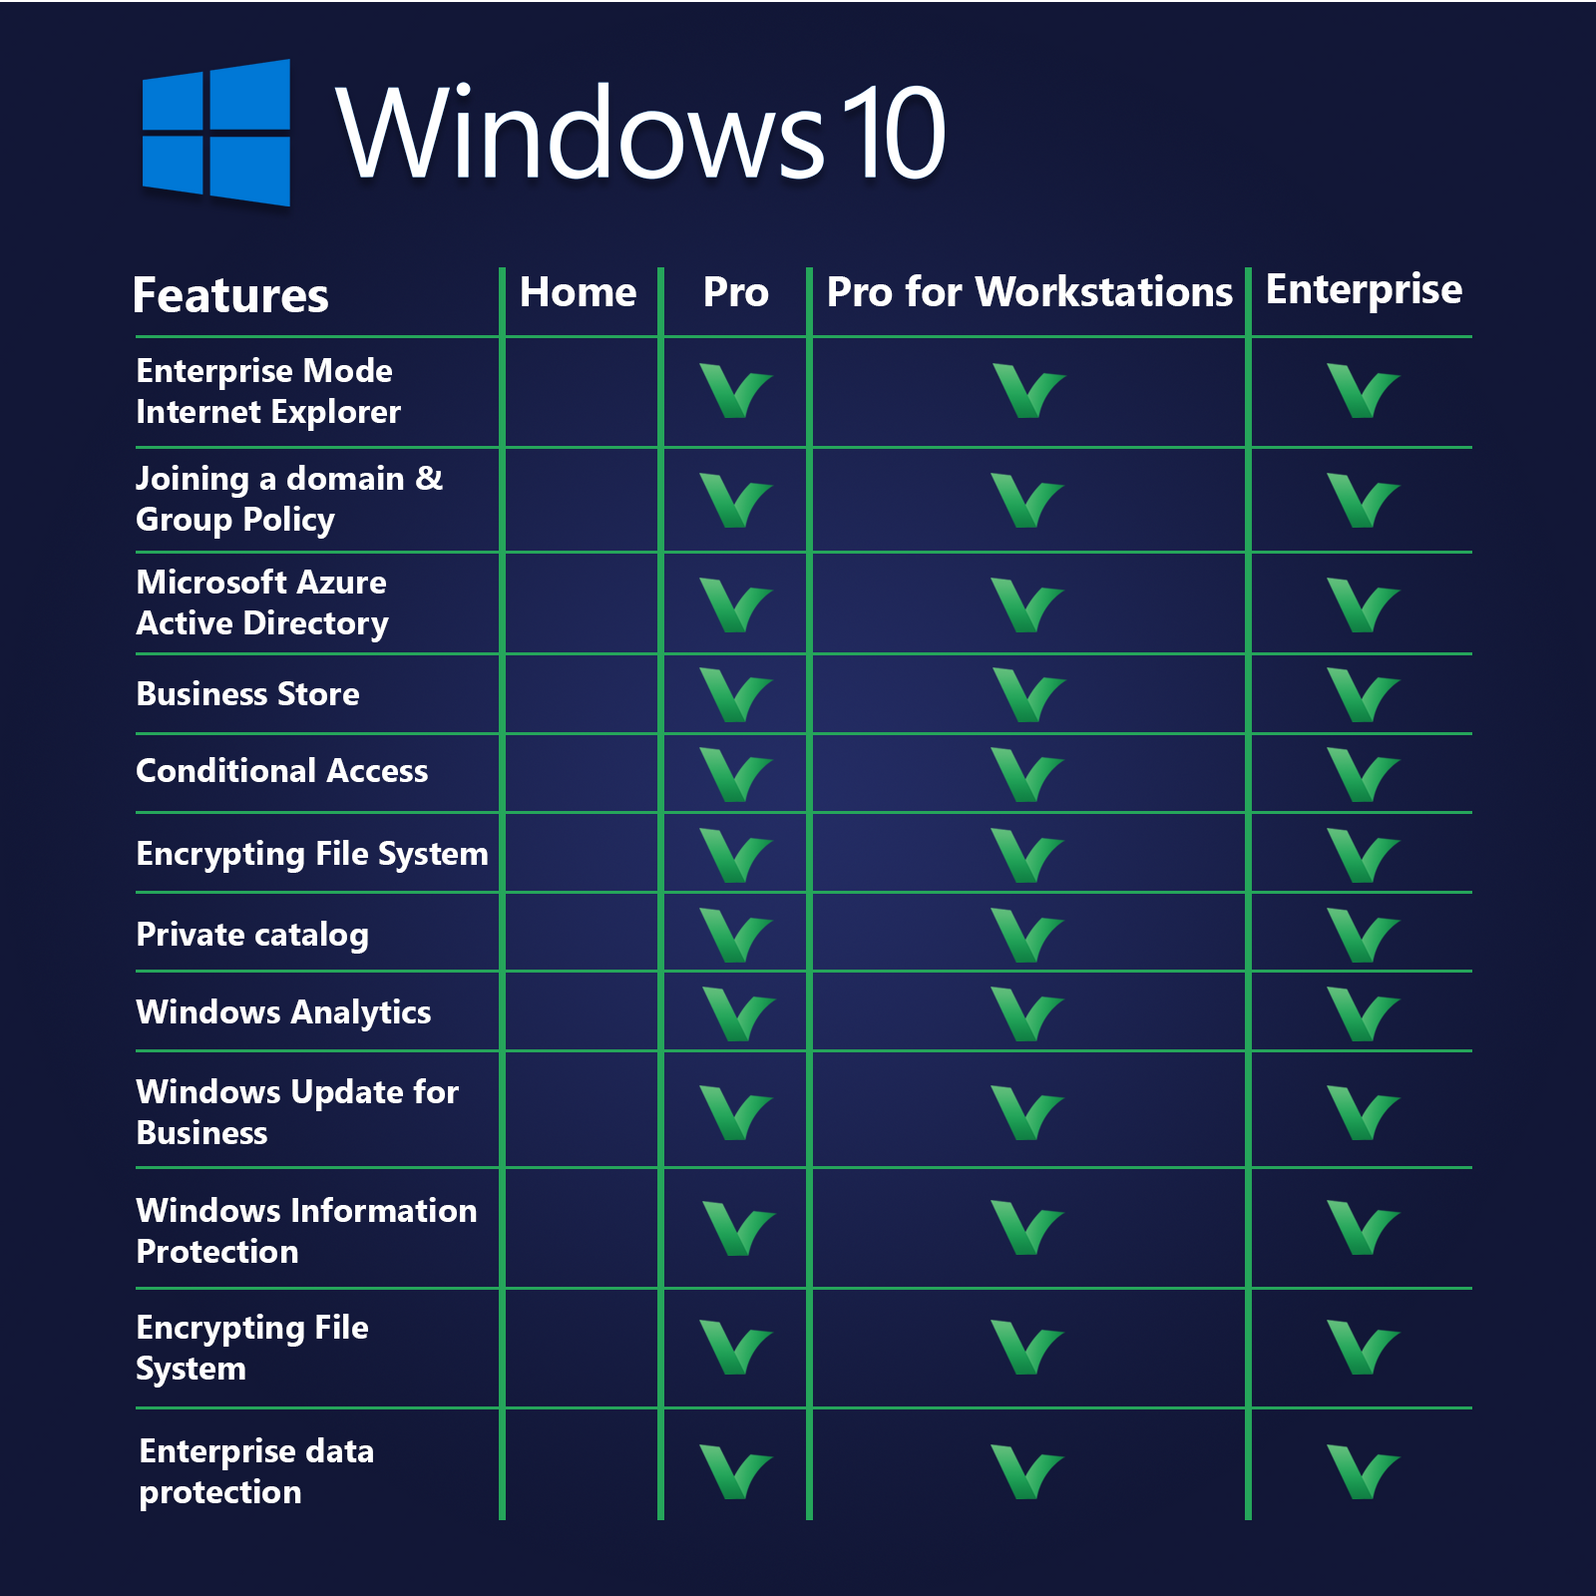 windows 10 pro for workstations iso